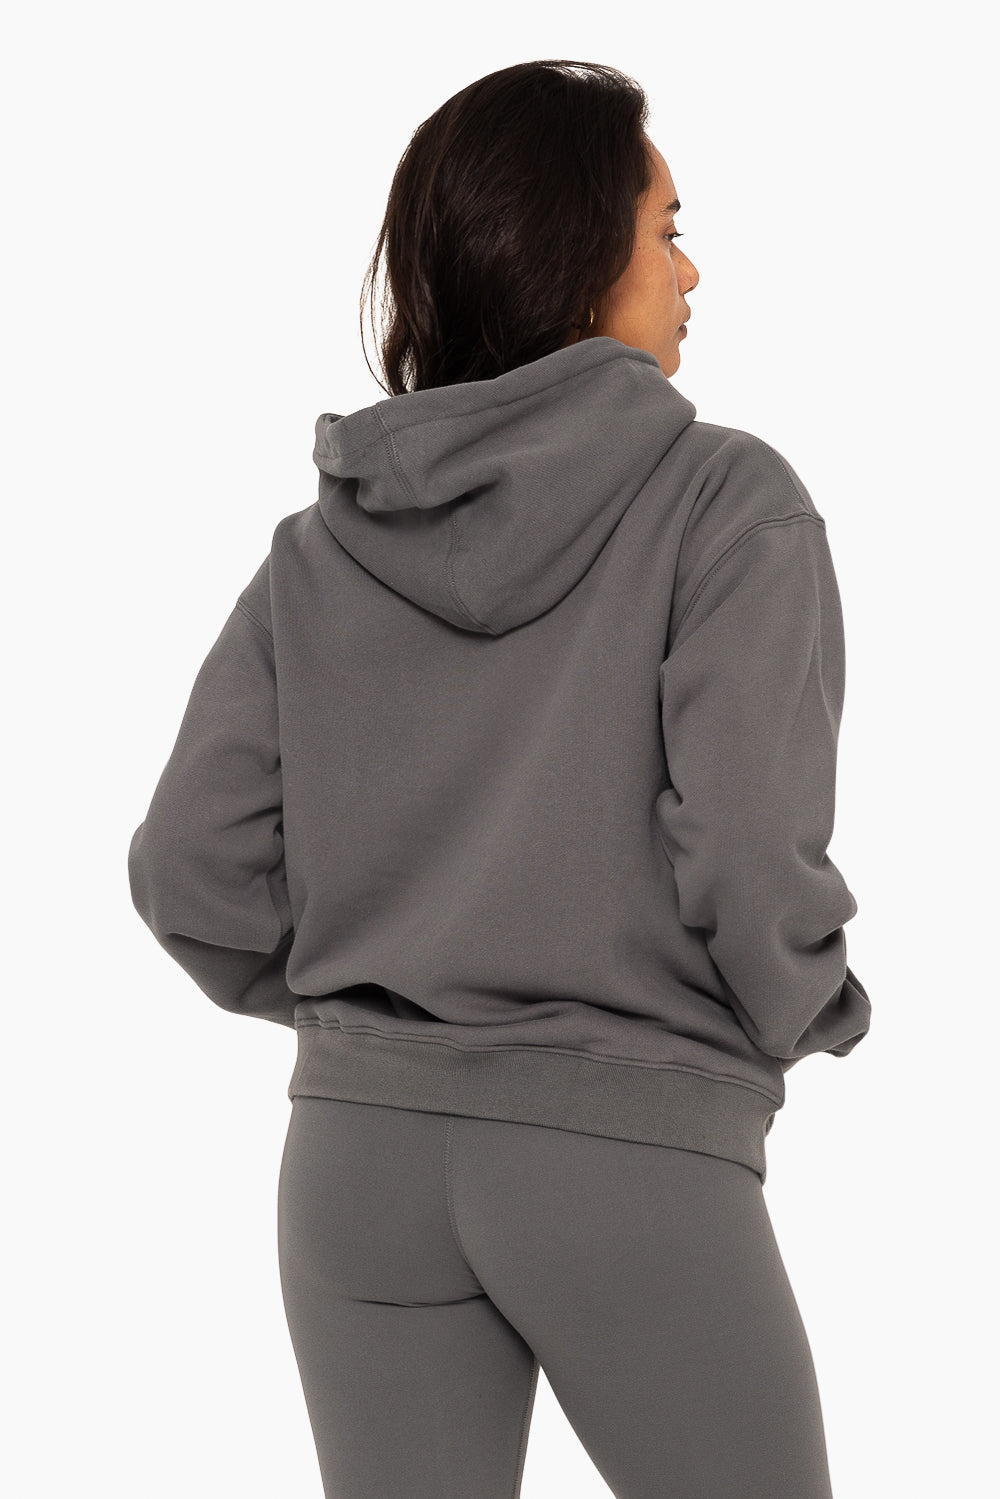 SET™ EMBROIDERED HEAVYWEIGHT SWEATS HOODIE IN GRAPHITE